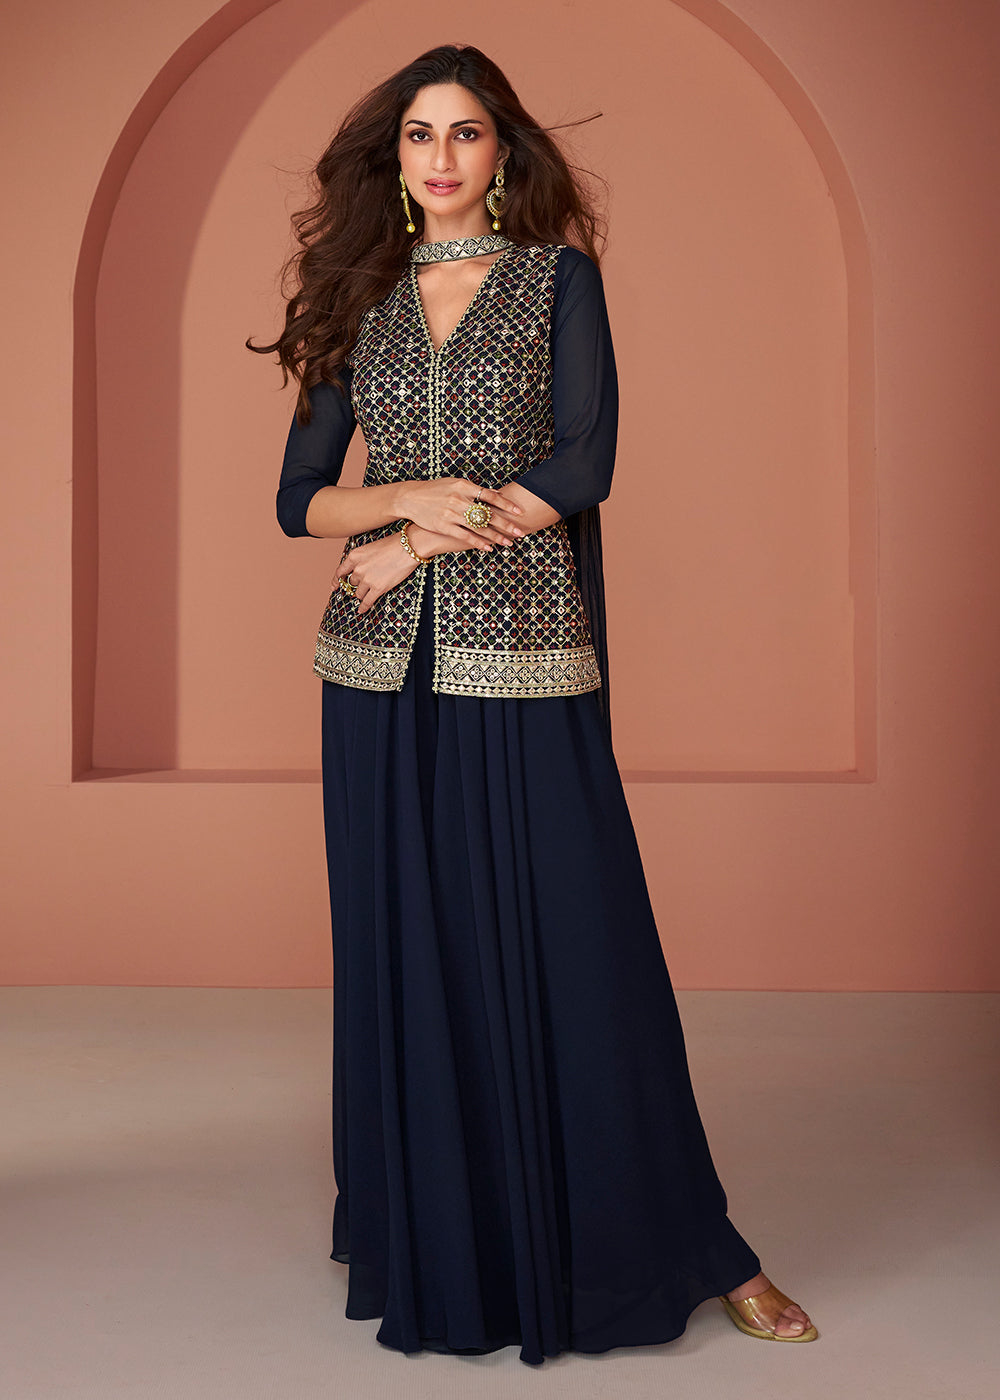 Buy Now Navy Blue Embroidered Georgette Indo Western Palazzo Suit Online in USA, UK, Canada, Germany, Australia & Worldwide at Empress Clothing.